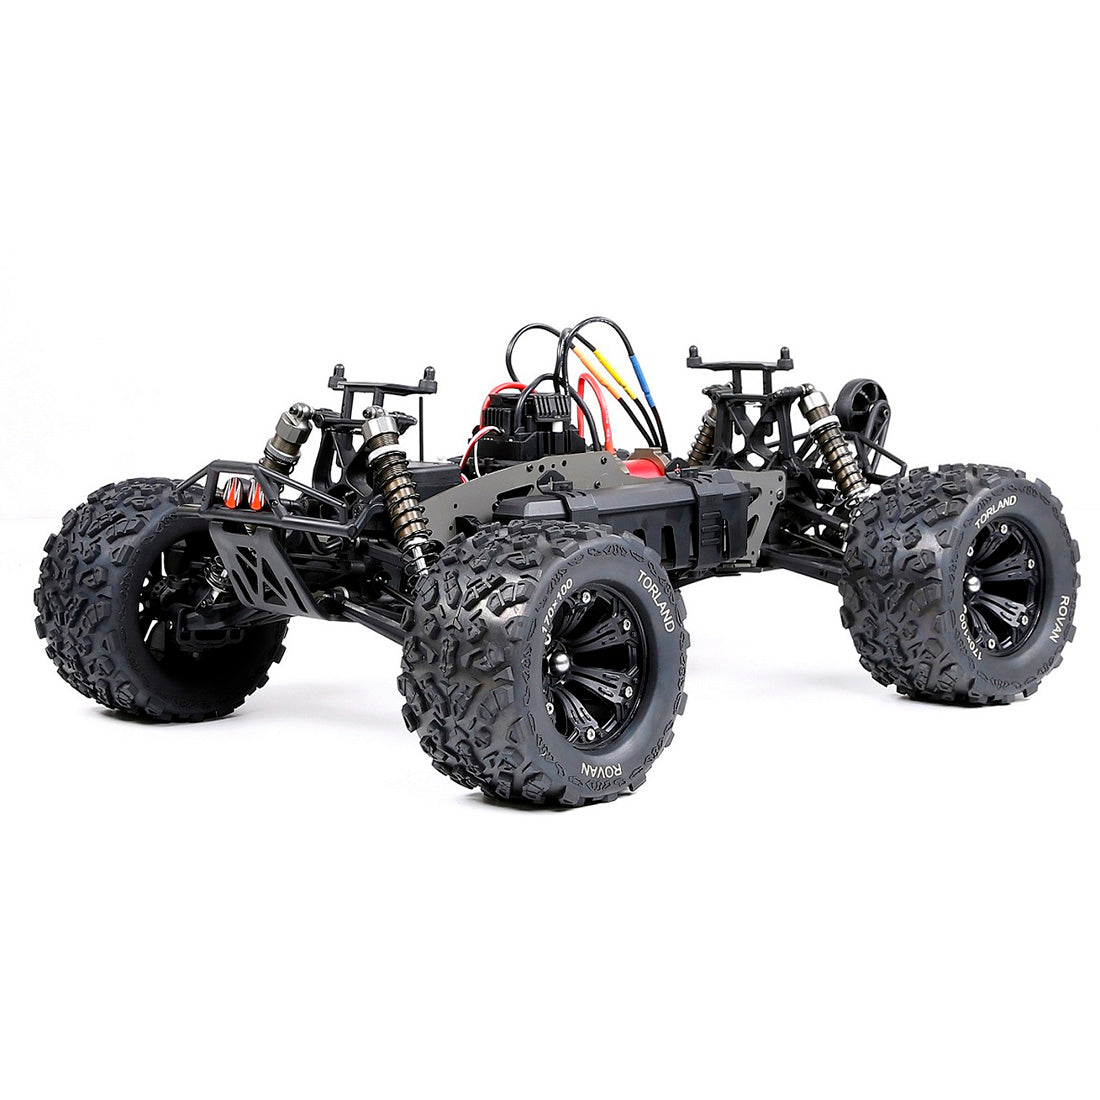 Rovan TORLAND XL EV6 1/8 4WD 2.4G High Speed RC Brushless Pickup Truck Model Car with Center Differential